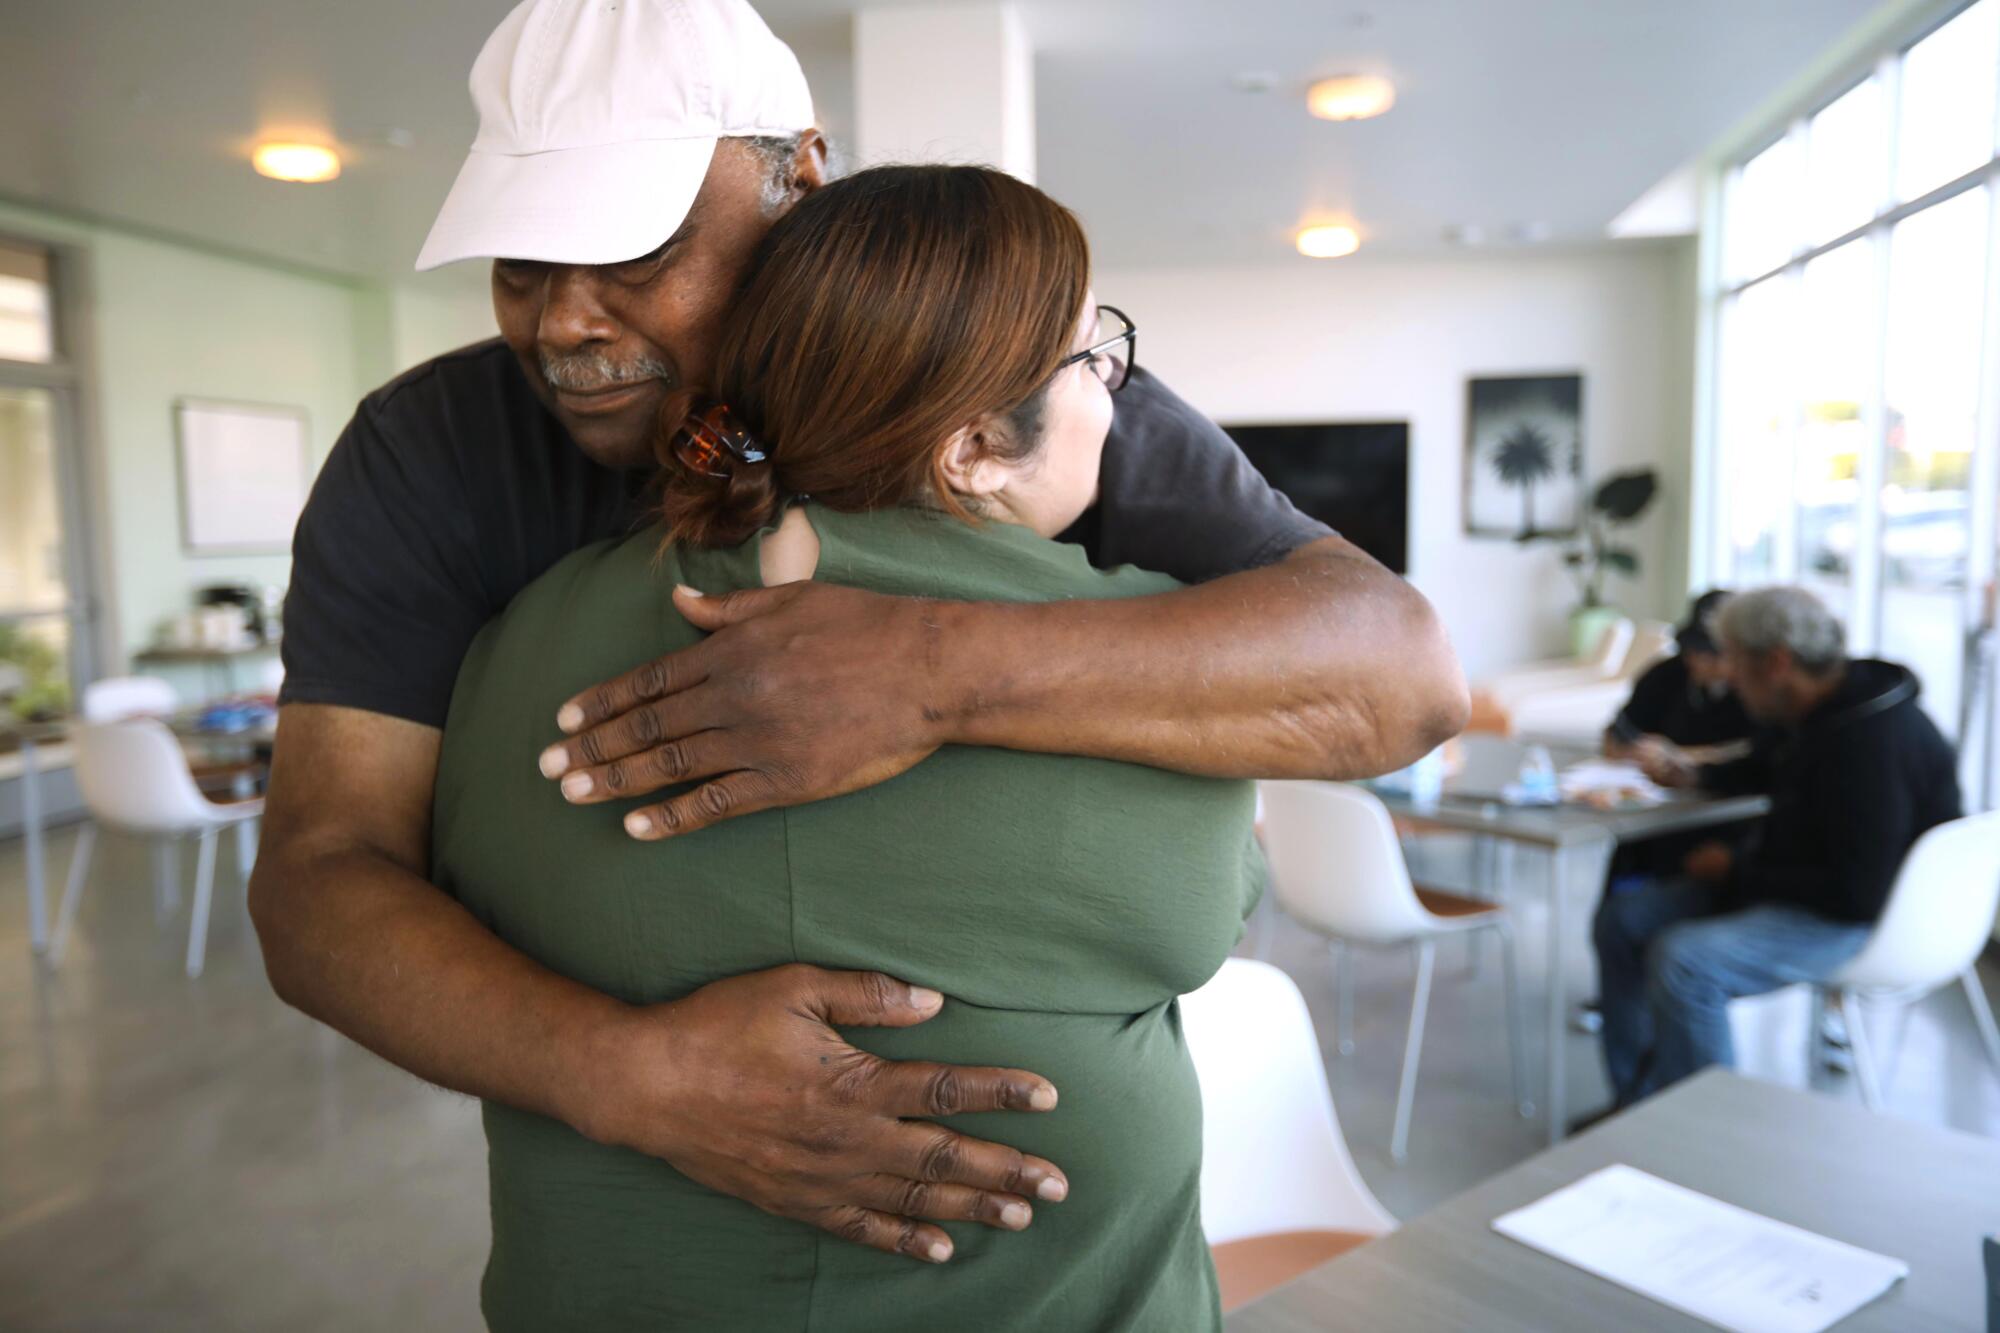 A man and a woman hug at an apartment complex